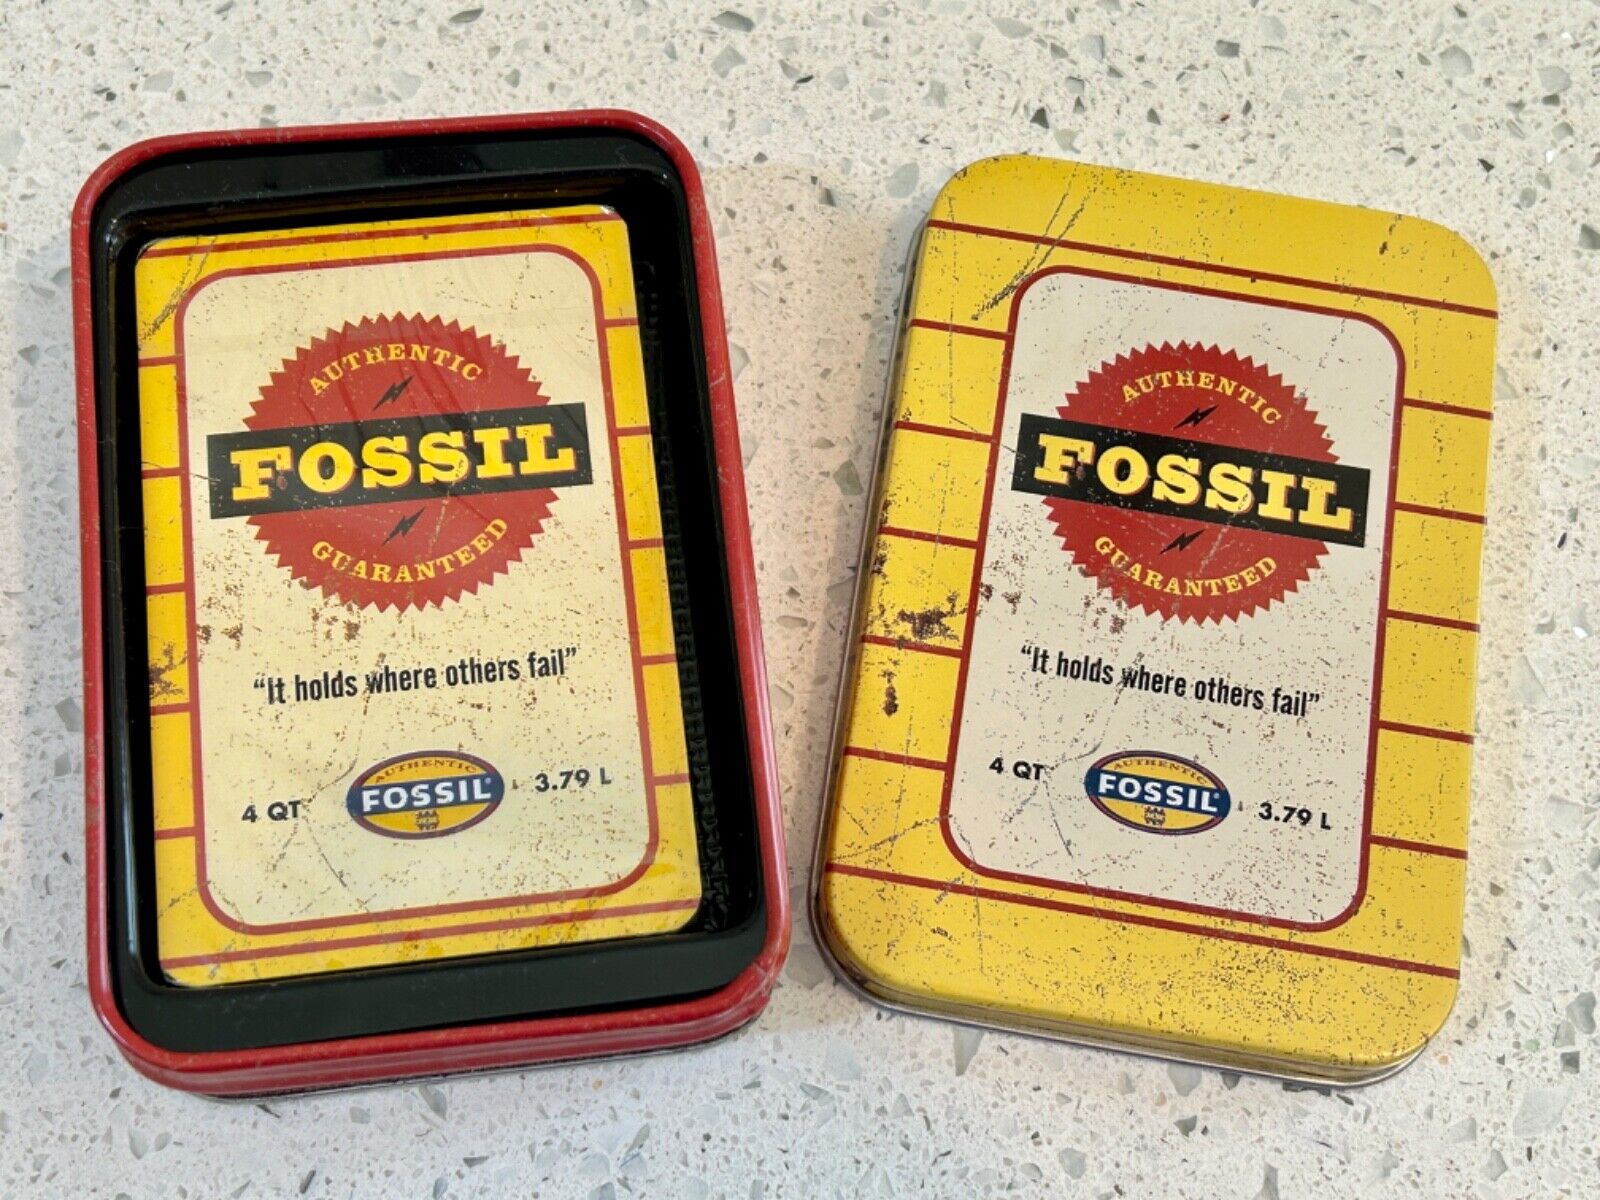 FOSSIL Brand Sealed Deck of Playing Cards in Tin -  It Holds Where Others Fail